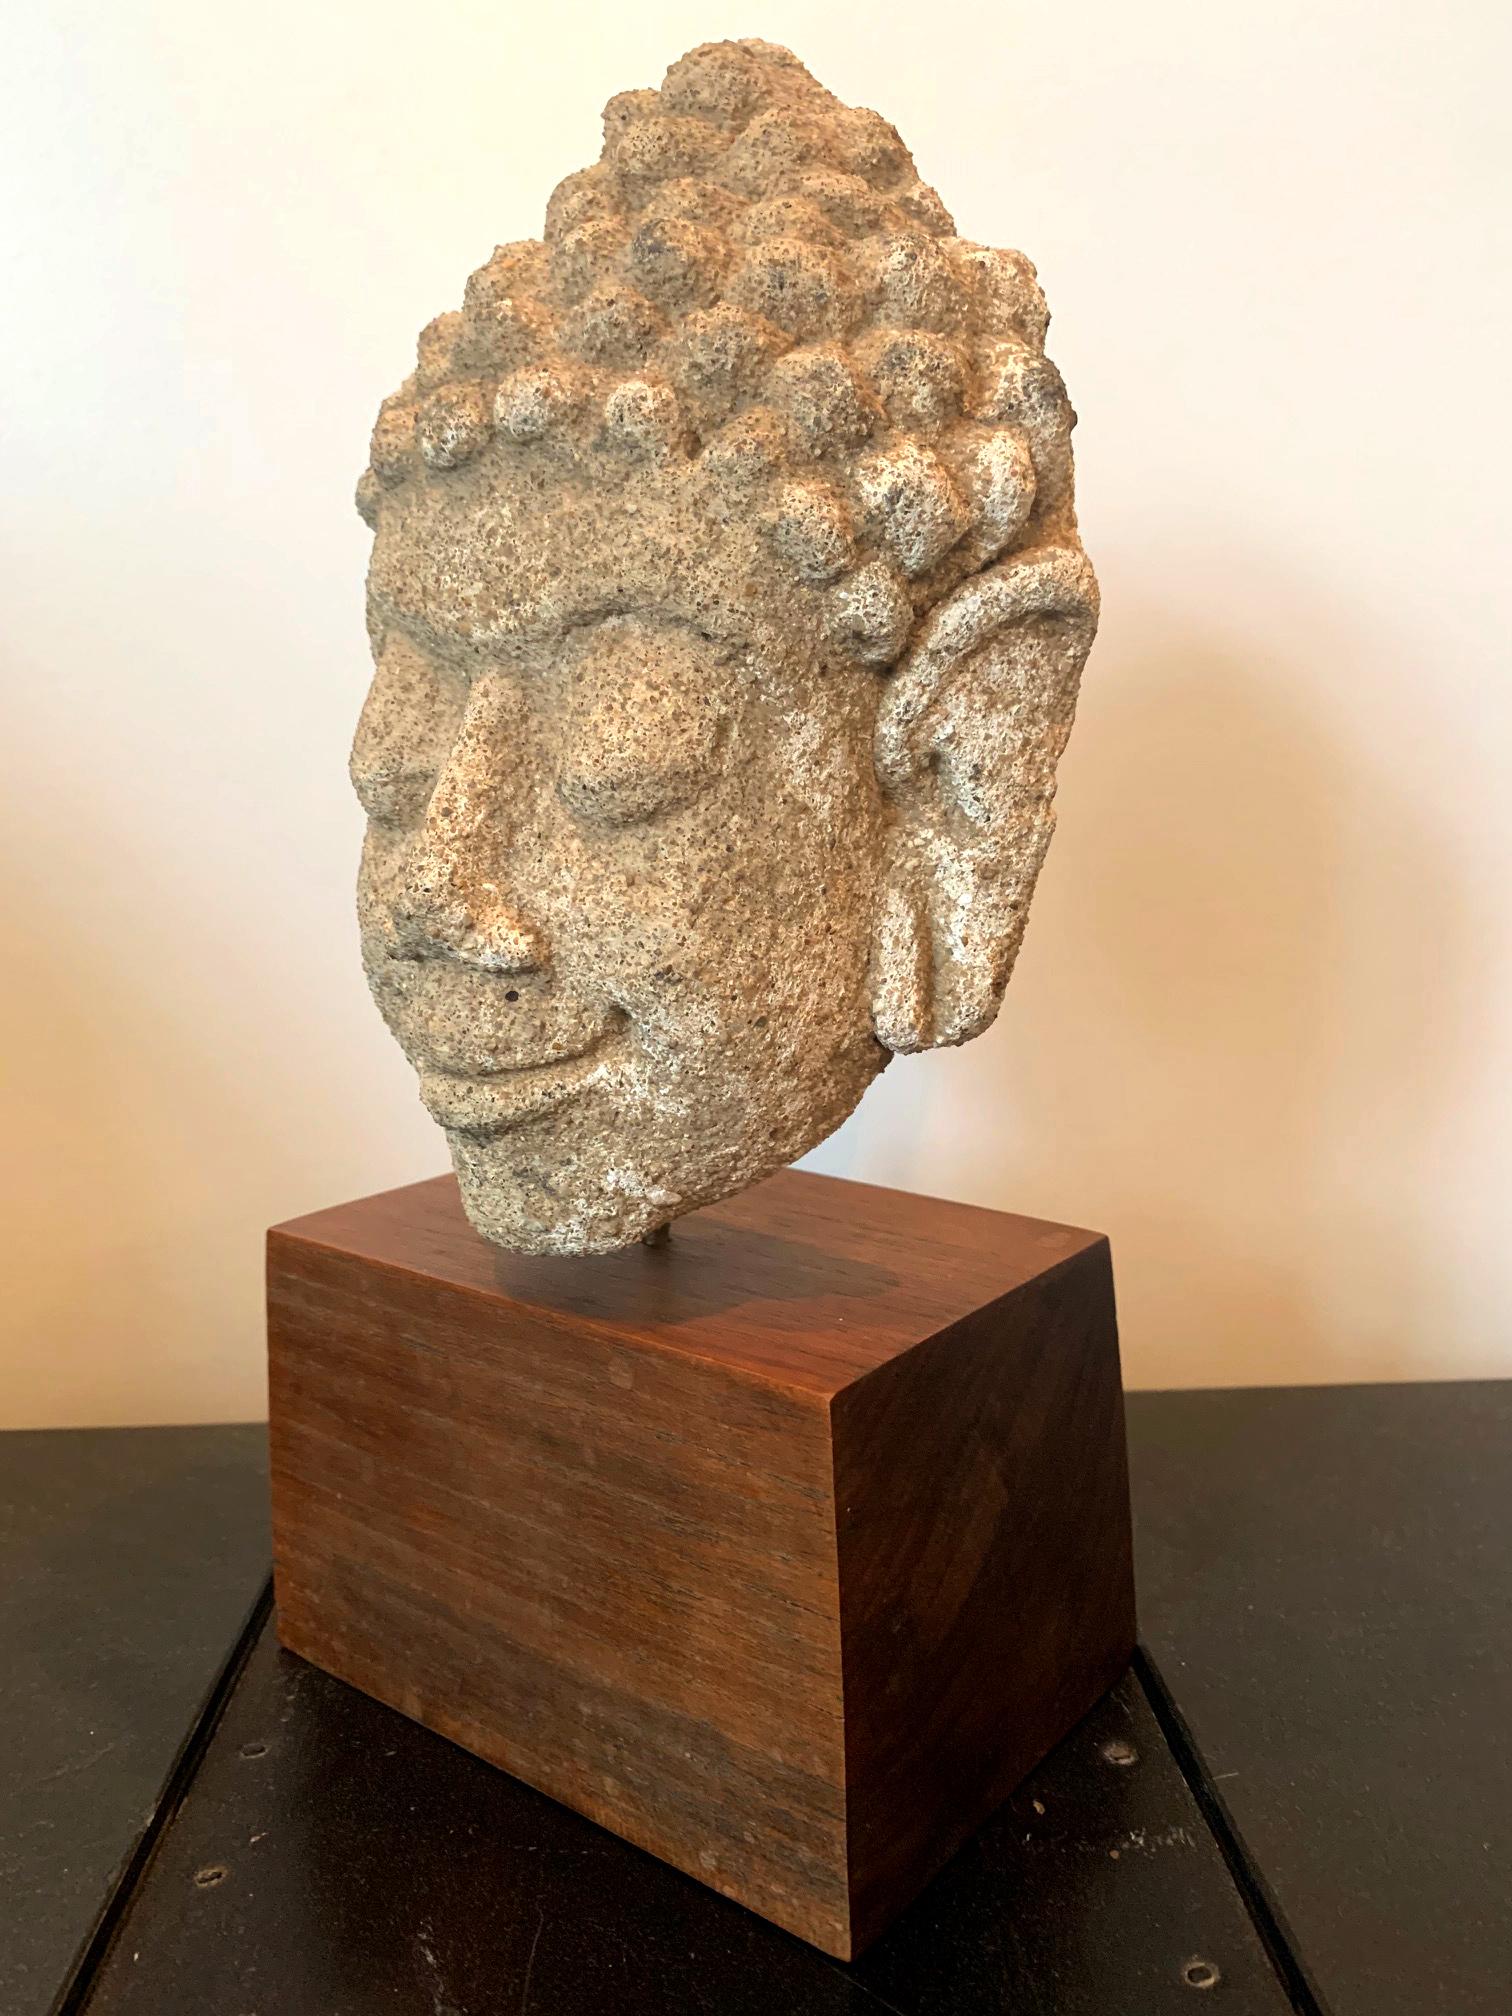 On offer is an early Buddha image from Dvaravati period (6-11th century) in Central Thailand. Made of stucco with an unfinished back suggesting its original use in architectural context. The Dvaravati period is the onset of the Buddhism image seen